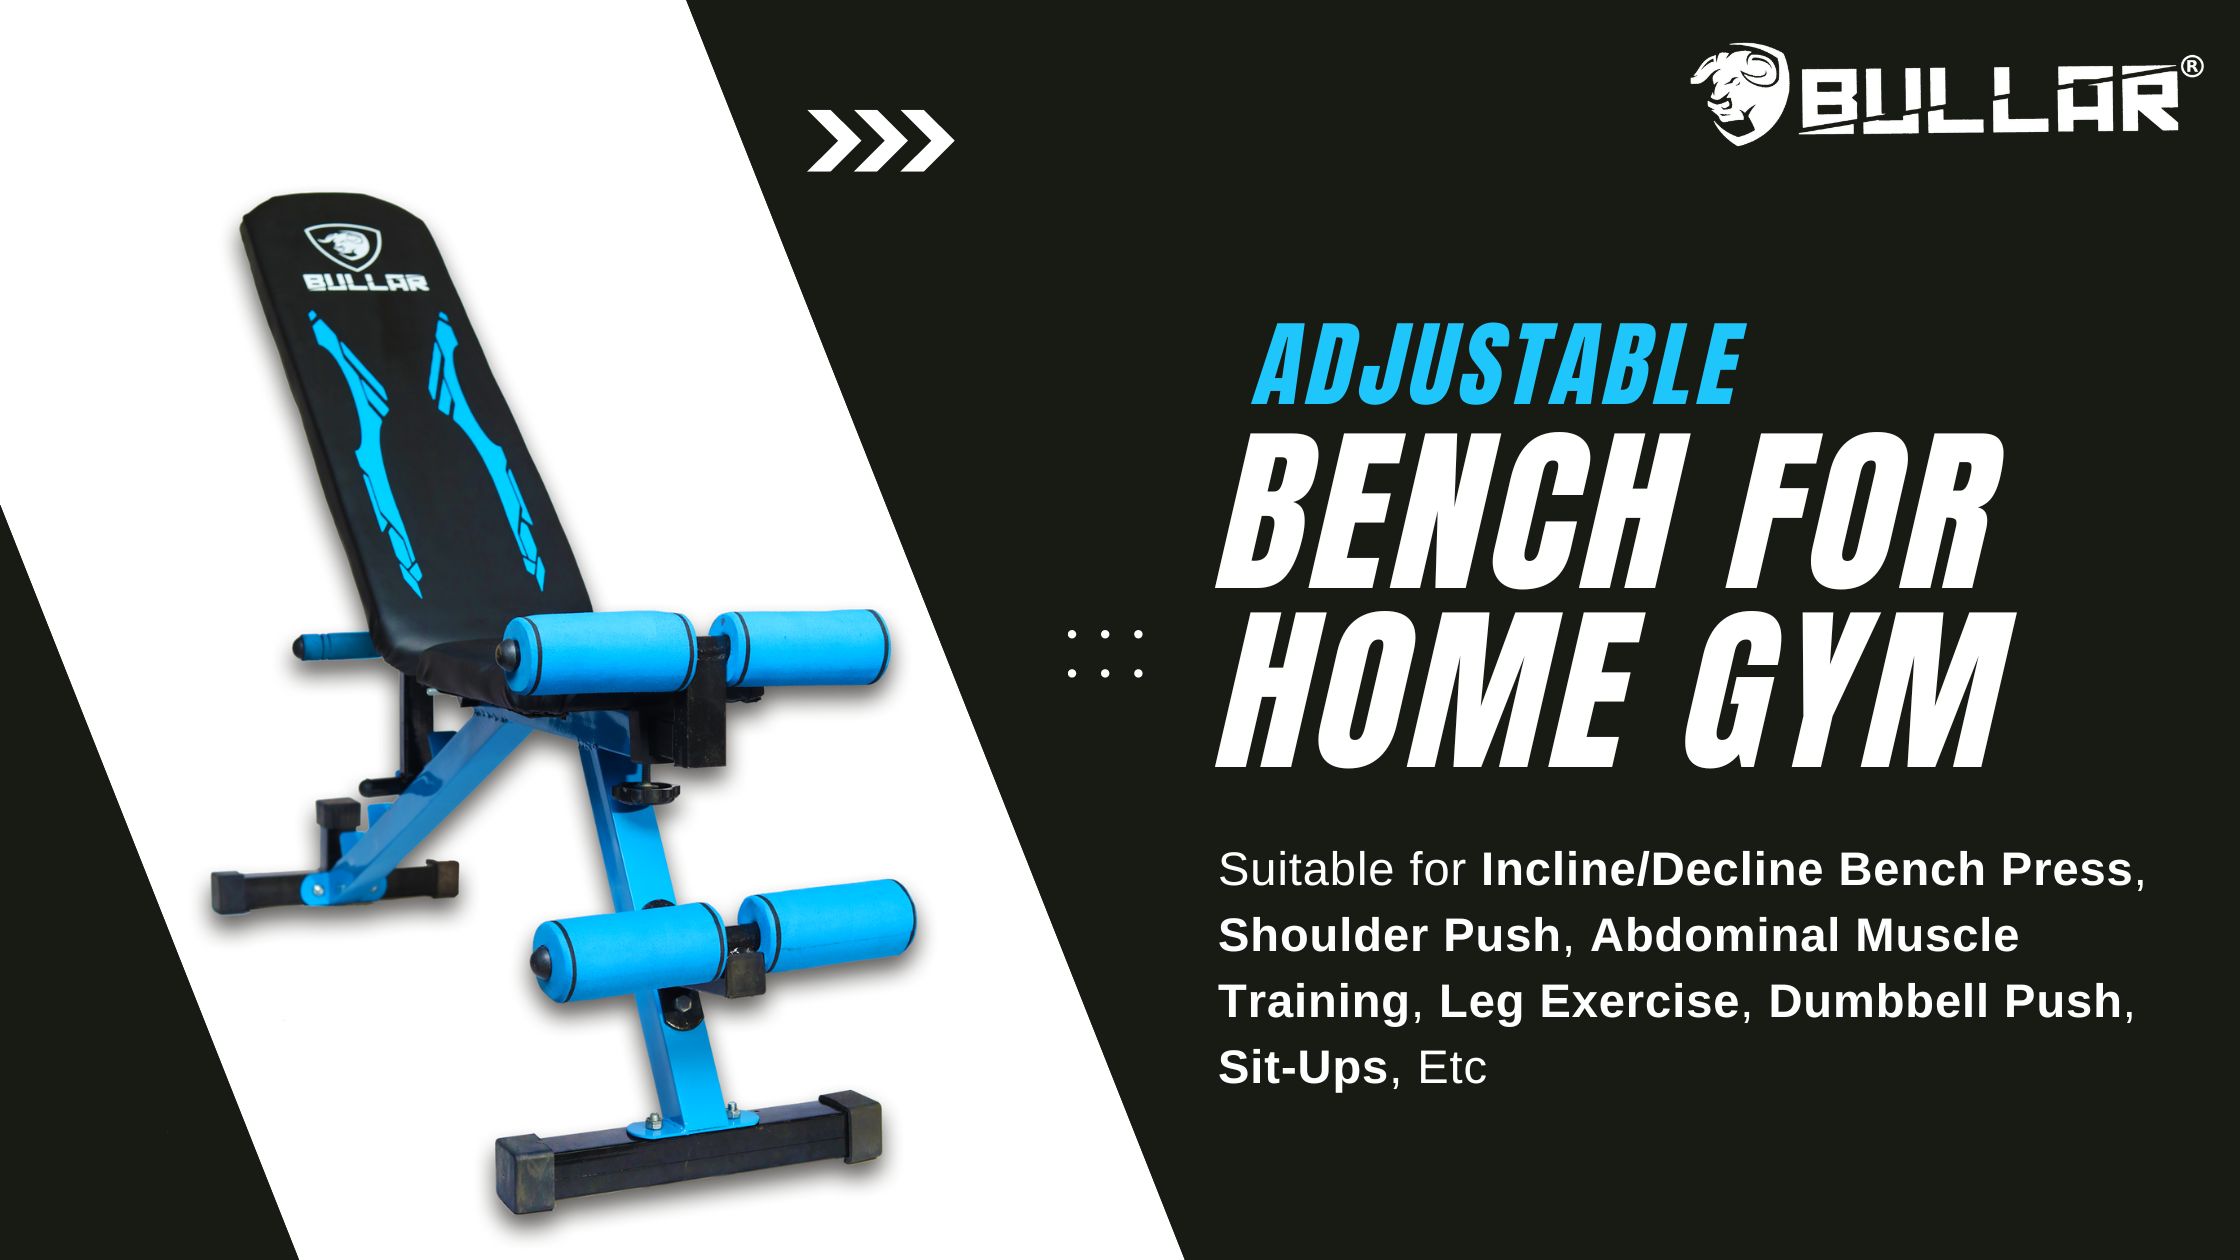 Bench For Home Gym - Best Fitness Equipment for Workout